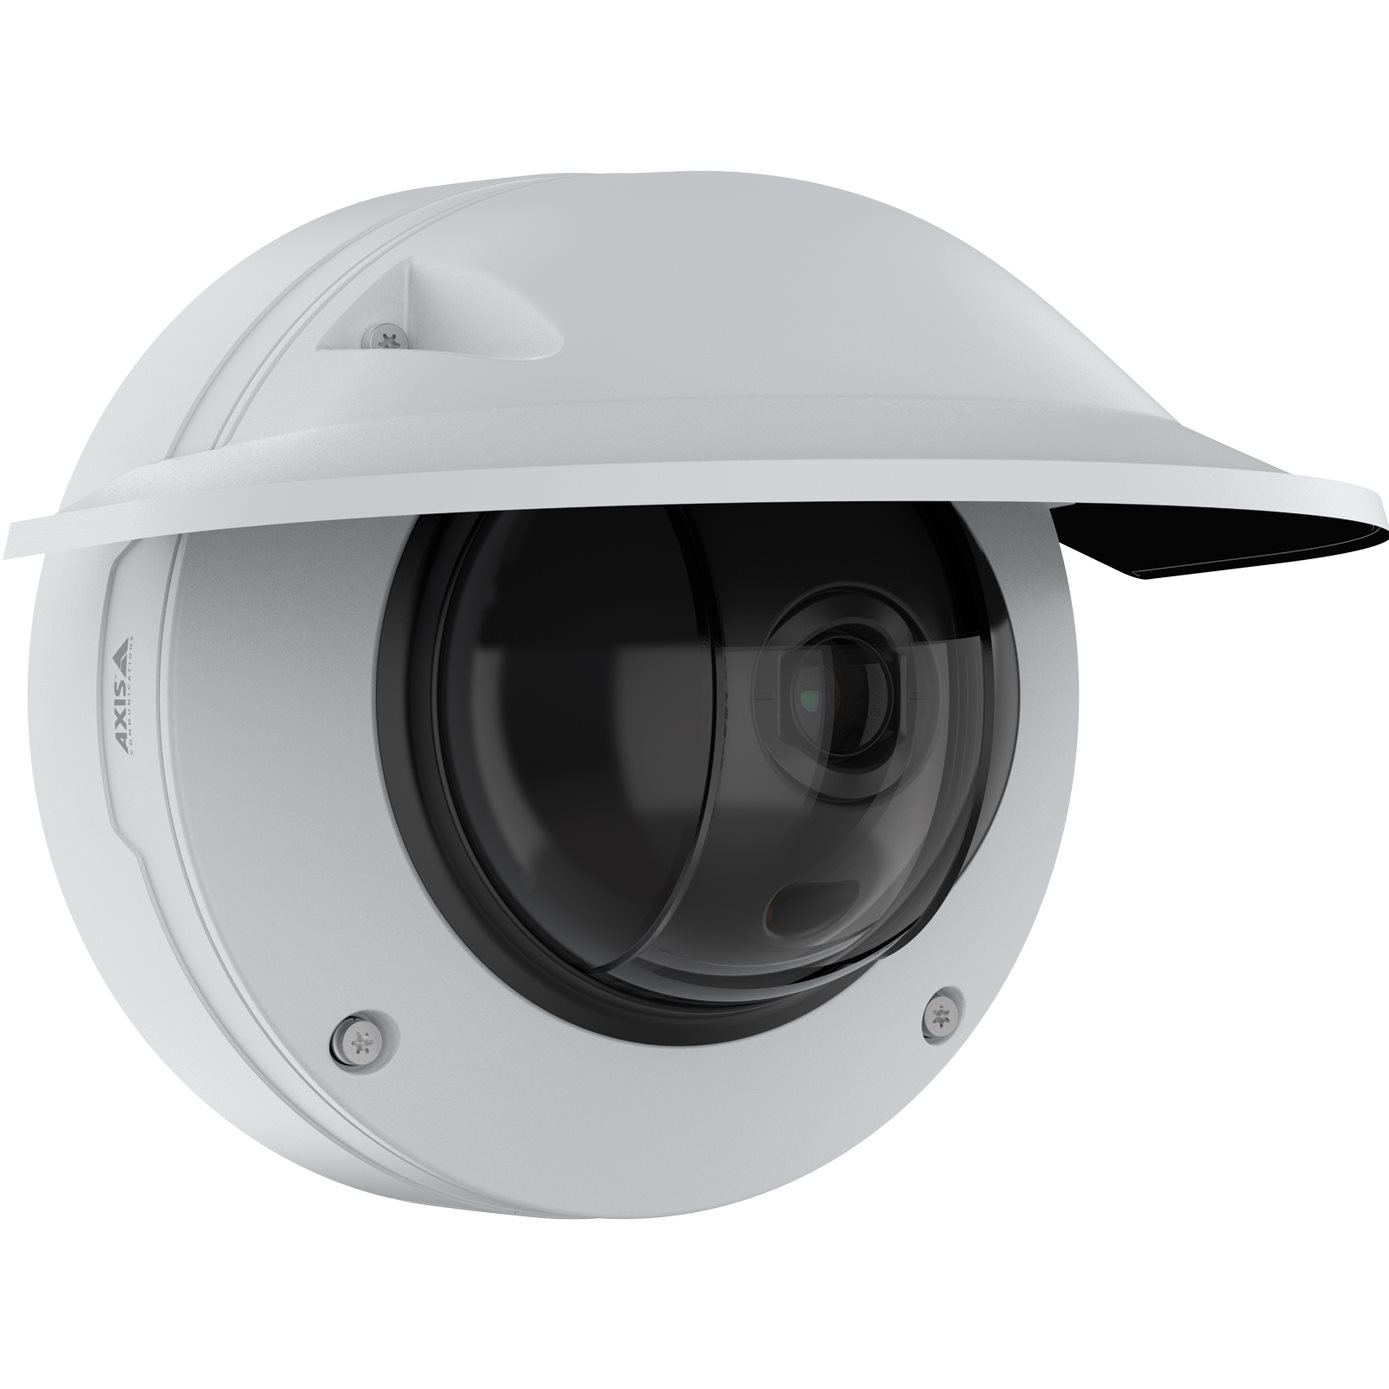 Camra Axis Q3536-LVE 9MM DOME CAMERA 02054-001